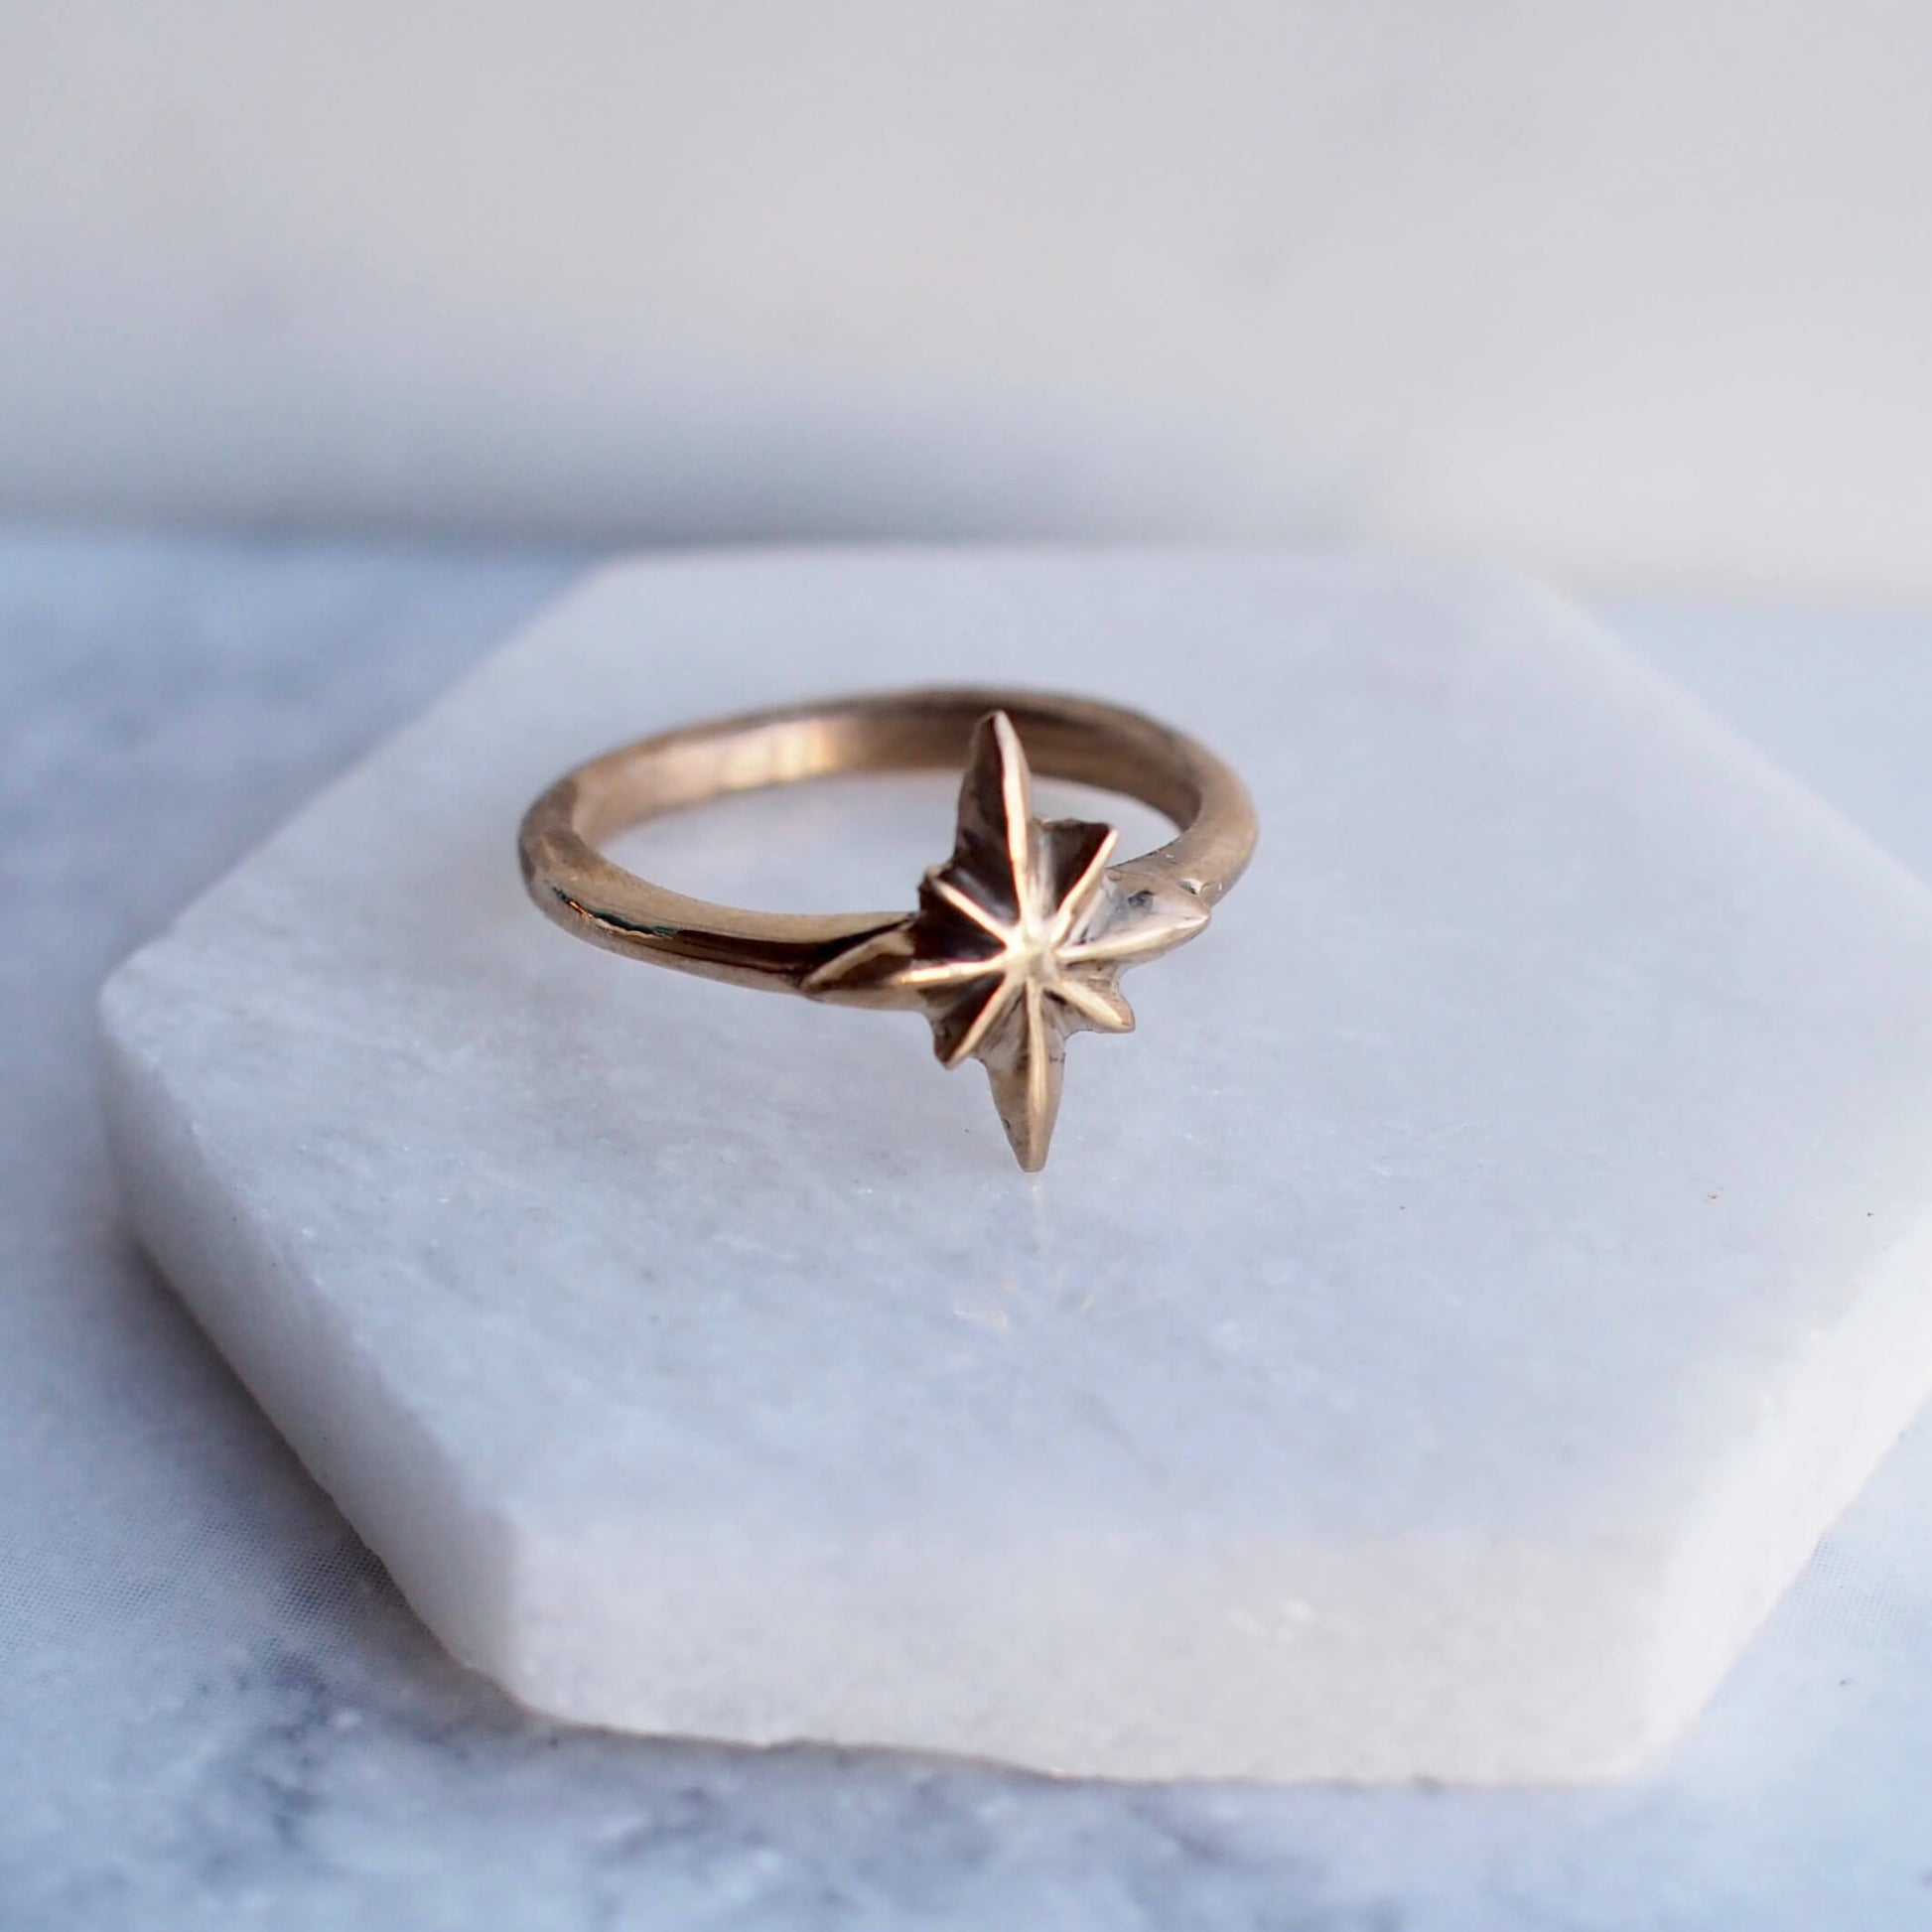 Celestial North Star Ring in Gold Tone Bronze by Iron Oxide